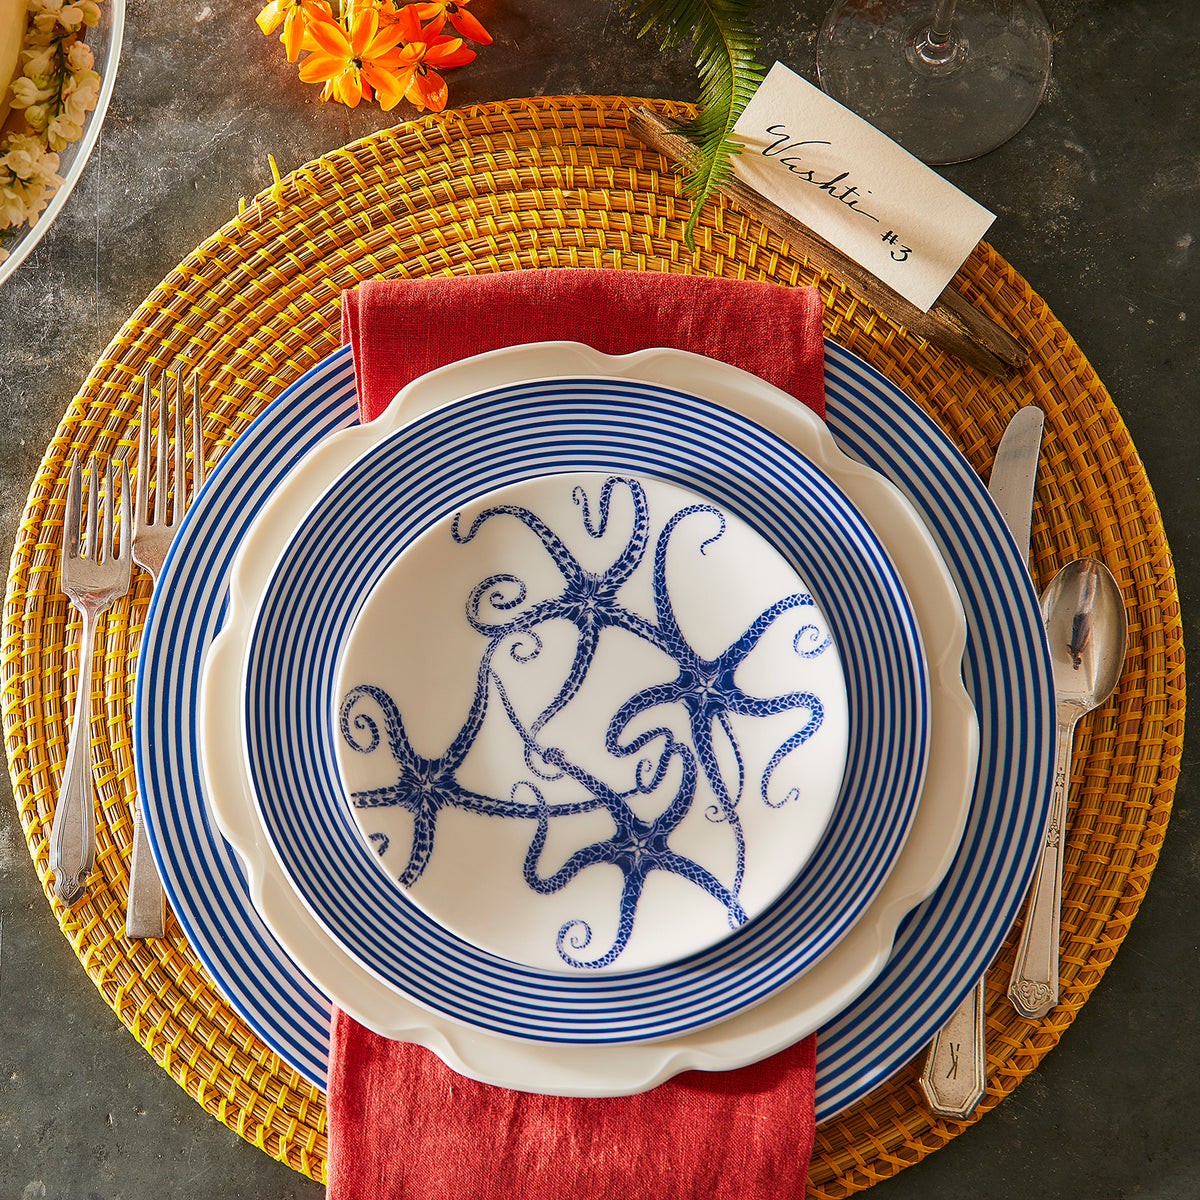 The Newport Racing Stripe Rimmed Salad Plate is shown as part part of a mixed blue and white table setting.